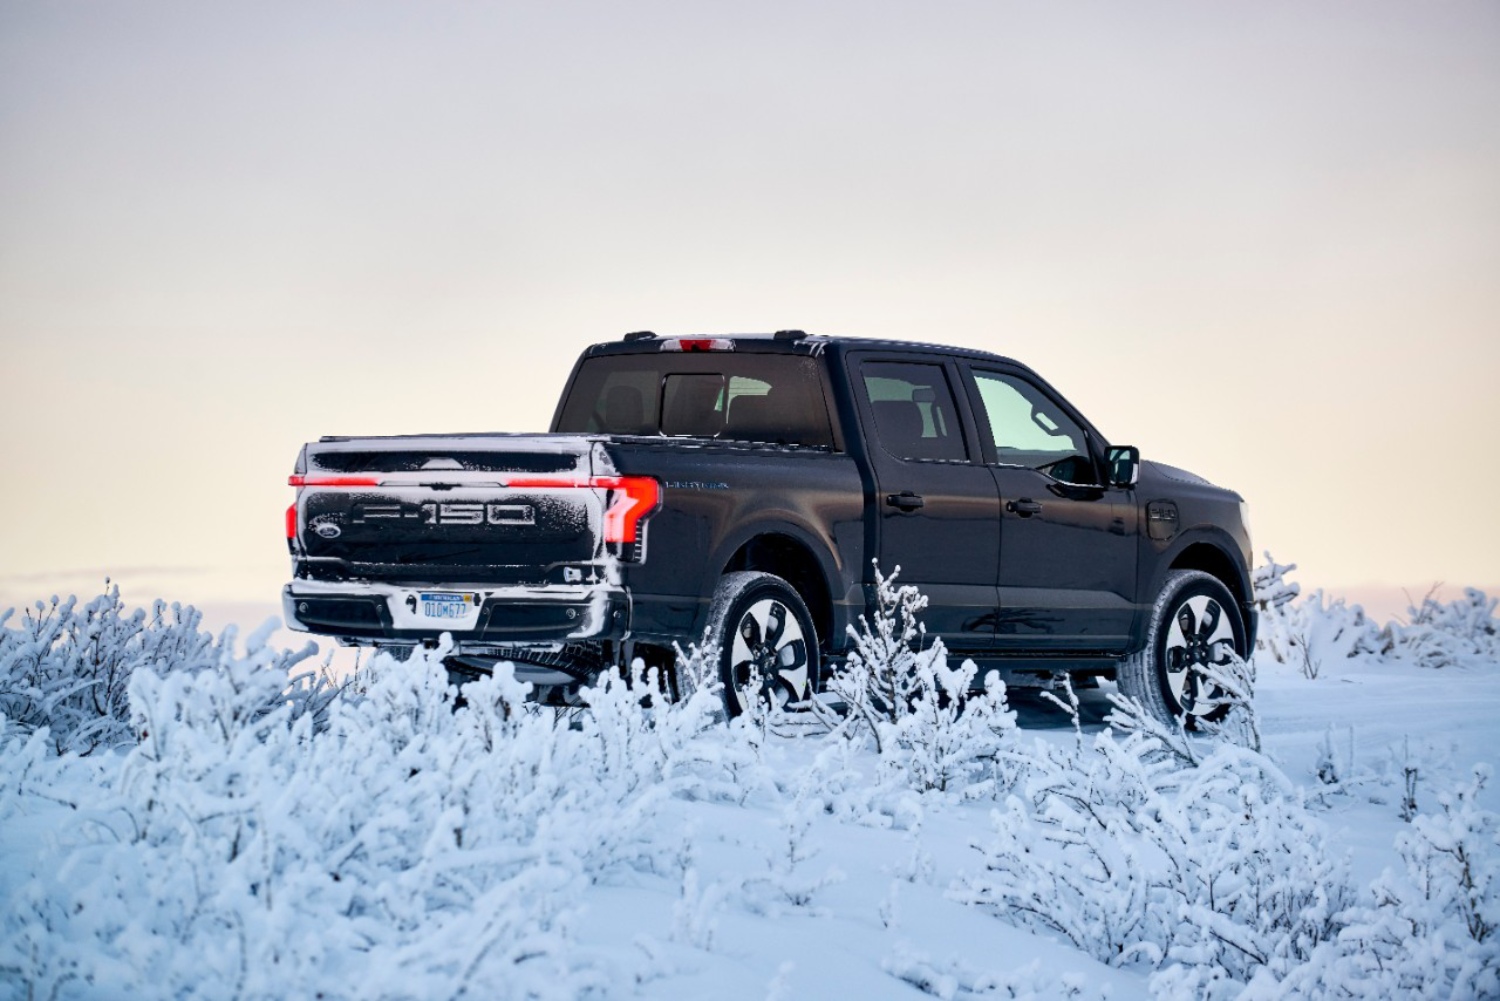 Trucks on Kelley Blue Book's Best Buy Awards include the Ford F-150 Lightning